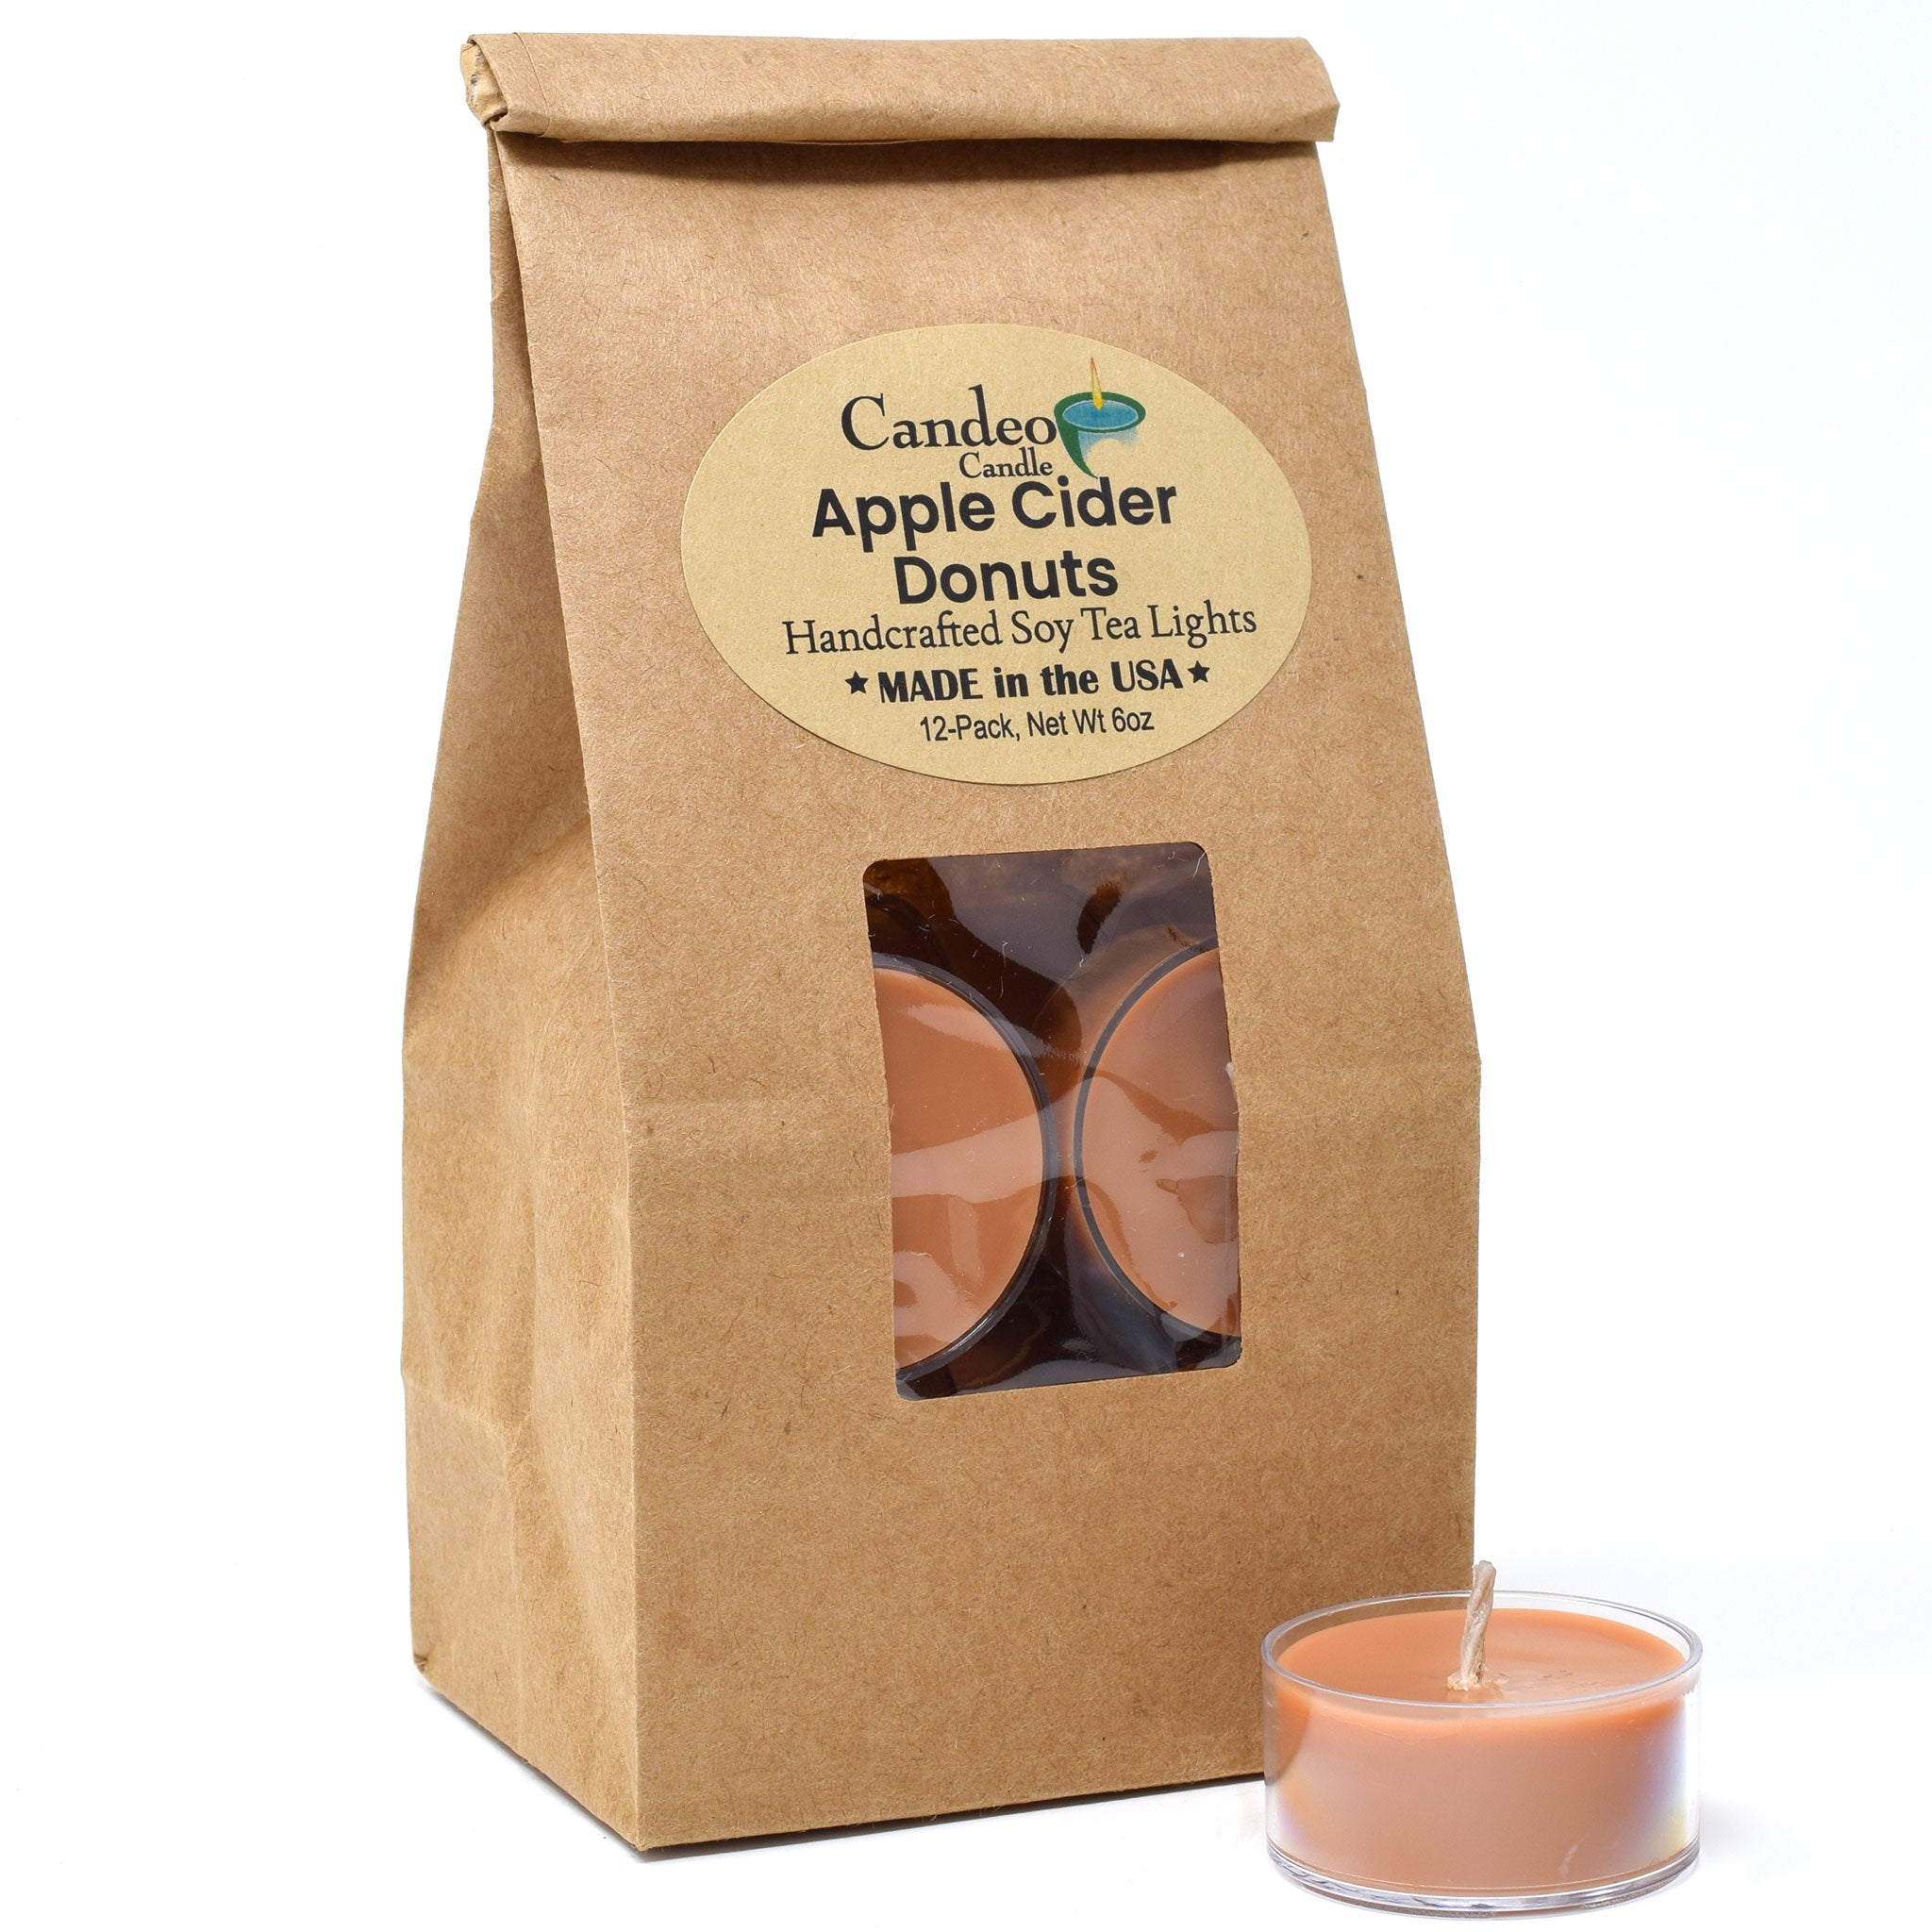 Apple Cider Donuts, Soy Tea Light 12-Pack - Candeo Candle